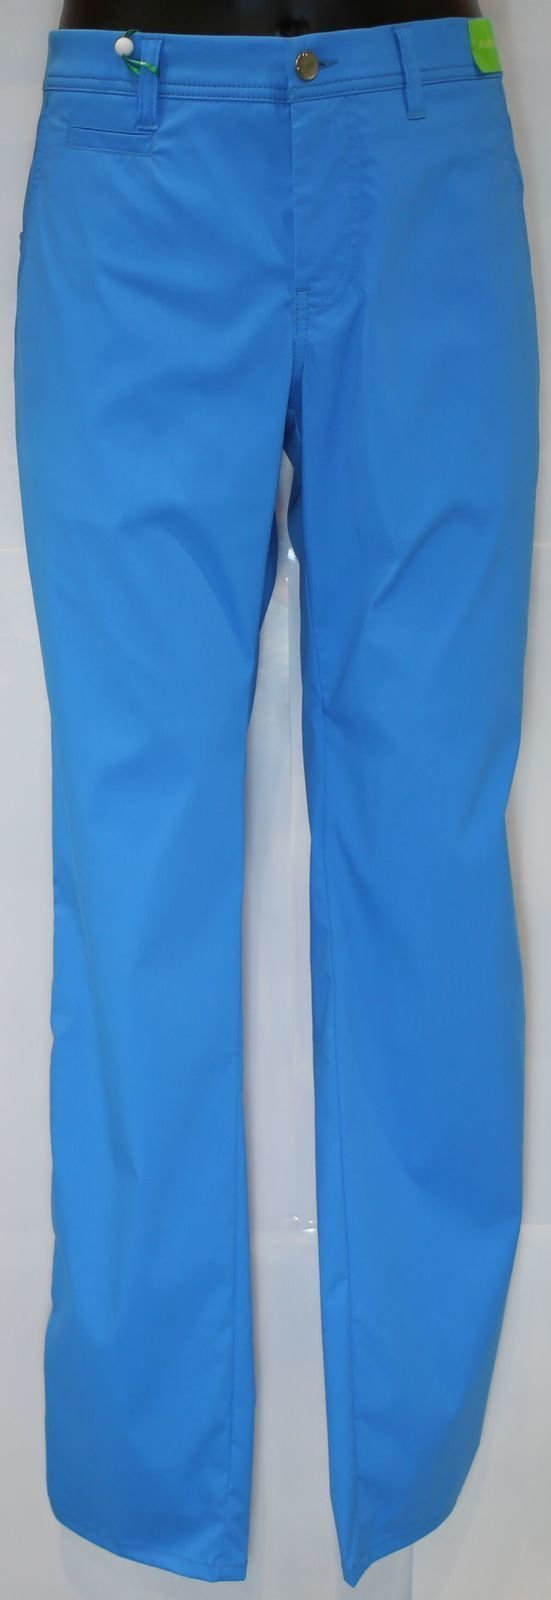 Trousers Alberto Rookie 3xDRY Cooler Blue 98